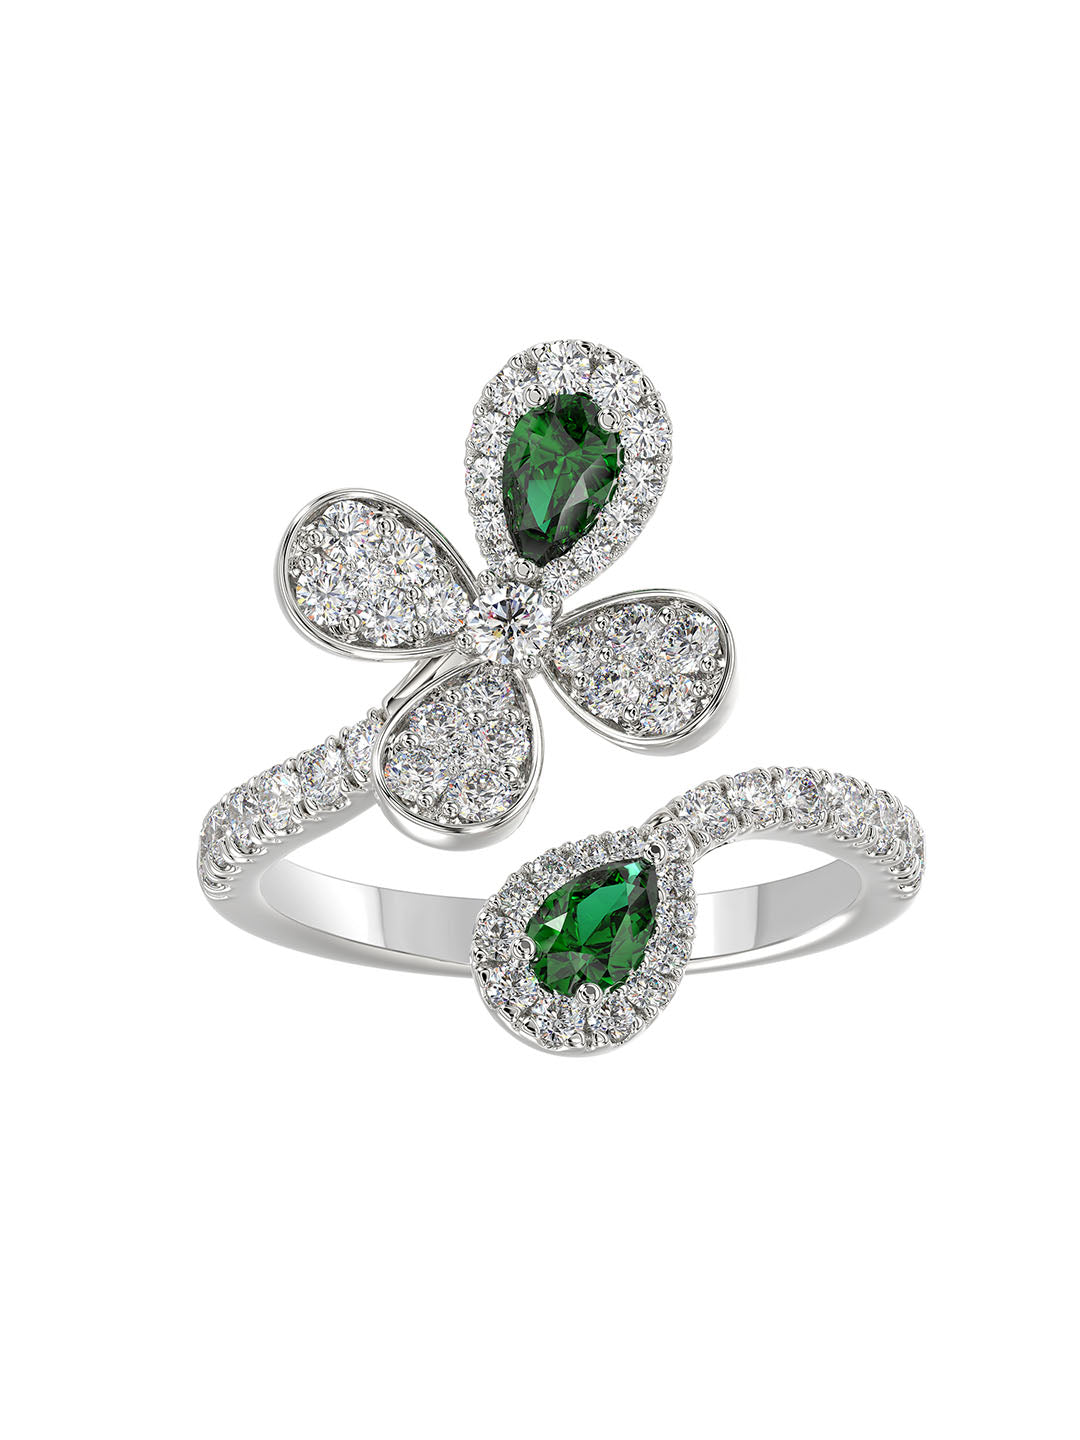 Floral White Gold Ring | Marchesa